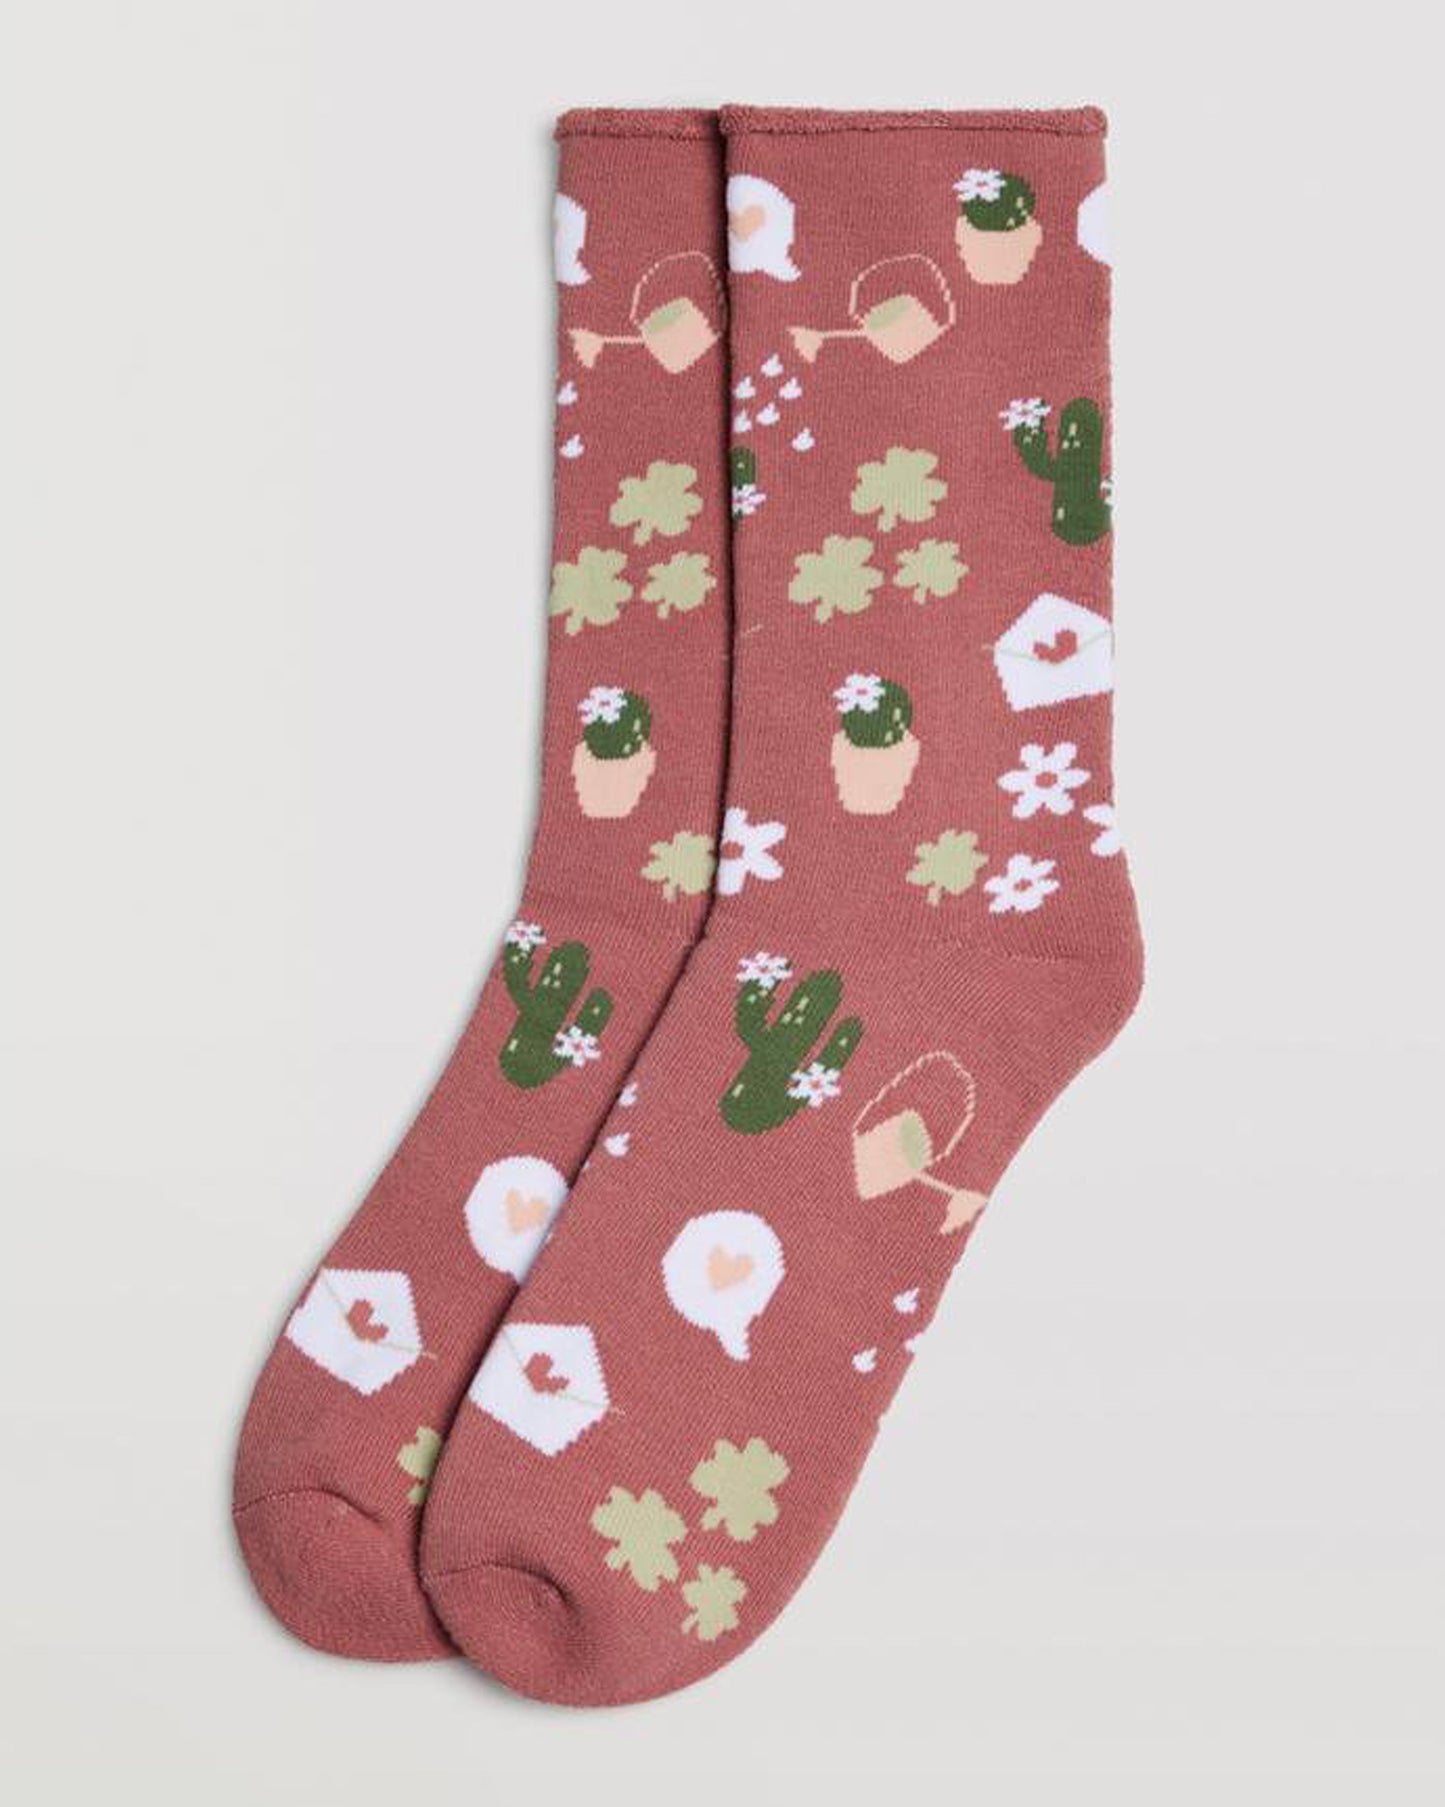 Ysabel Mora 12885 Gardener Sock - Dark pink cotton thermal socks with a terry lining and all over gardener themed pattern in shades of green, pink, peach and white, shaped heel and no cuff comfort top.